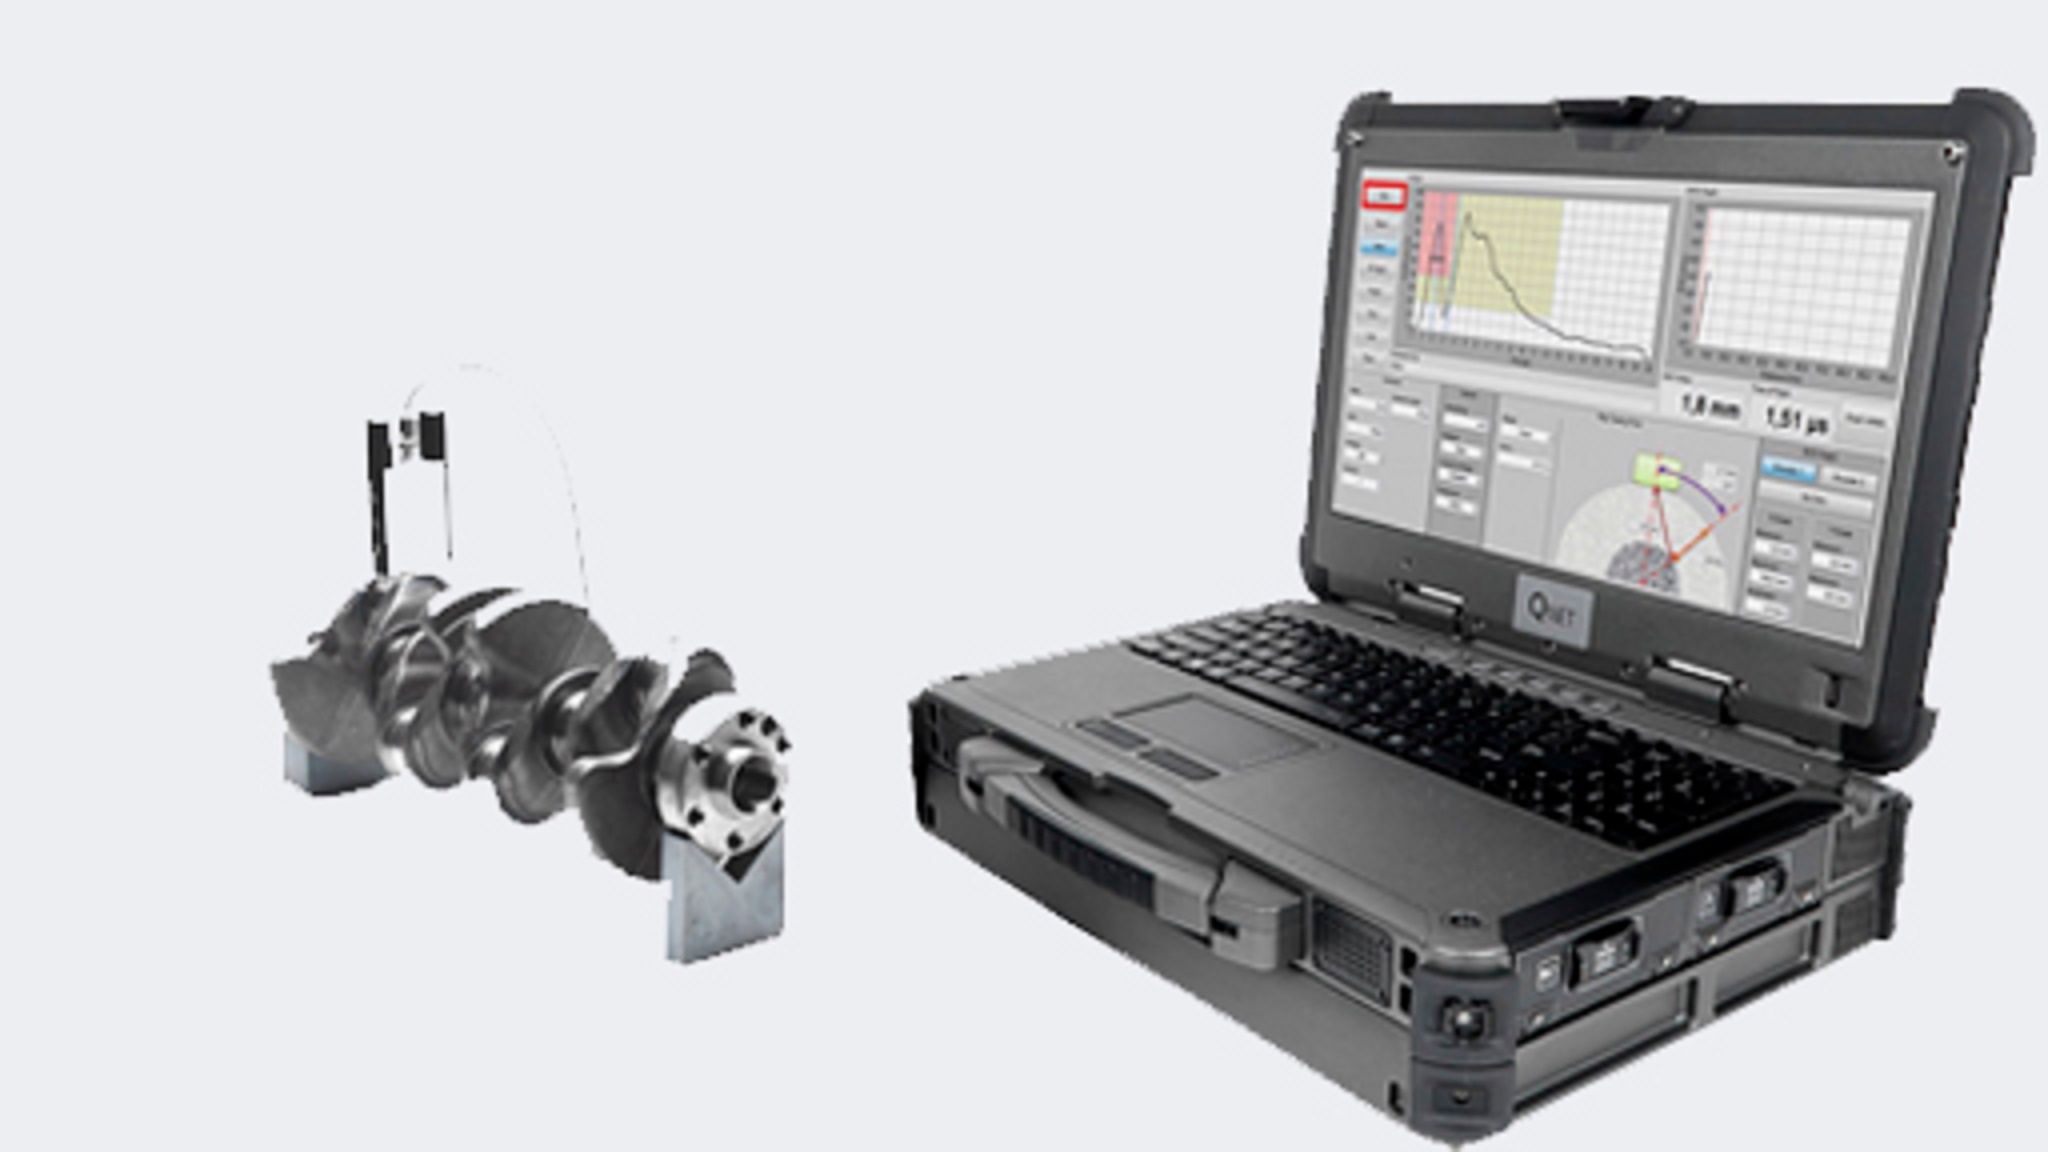 Product hardness depth test systems p 3123 from the supplier Q NET Engineering